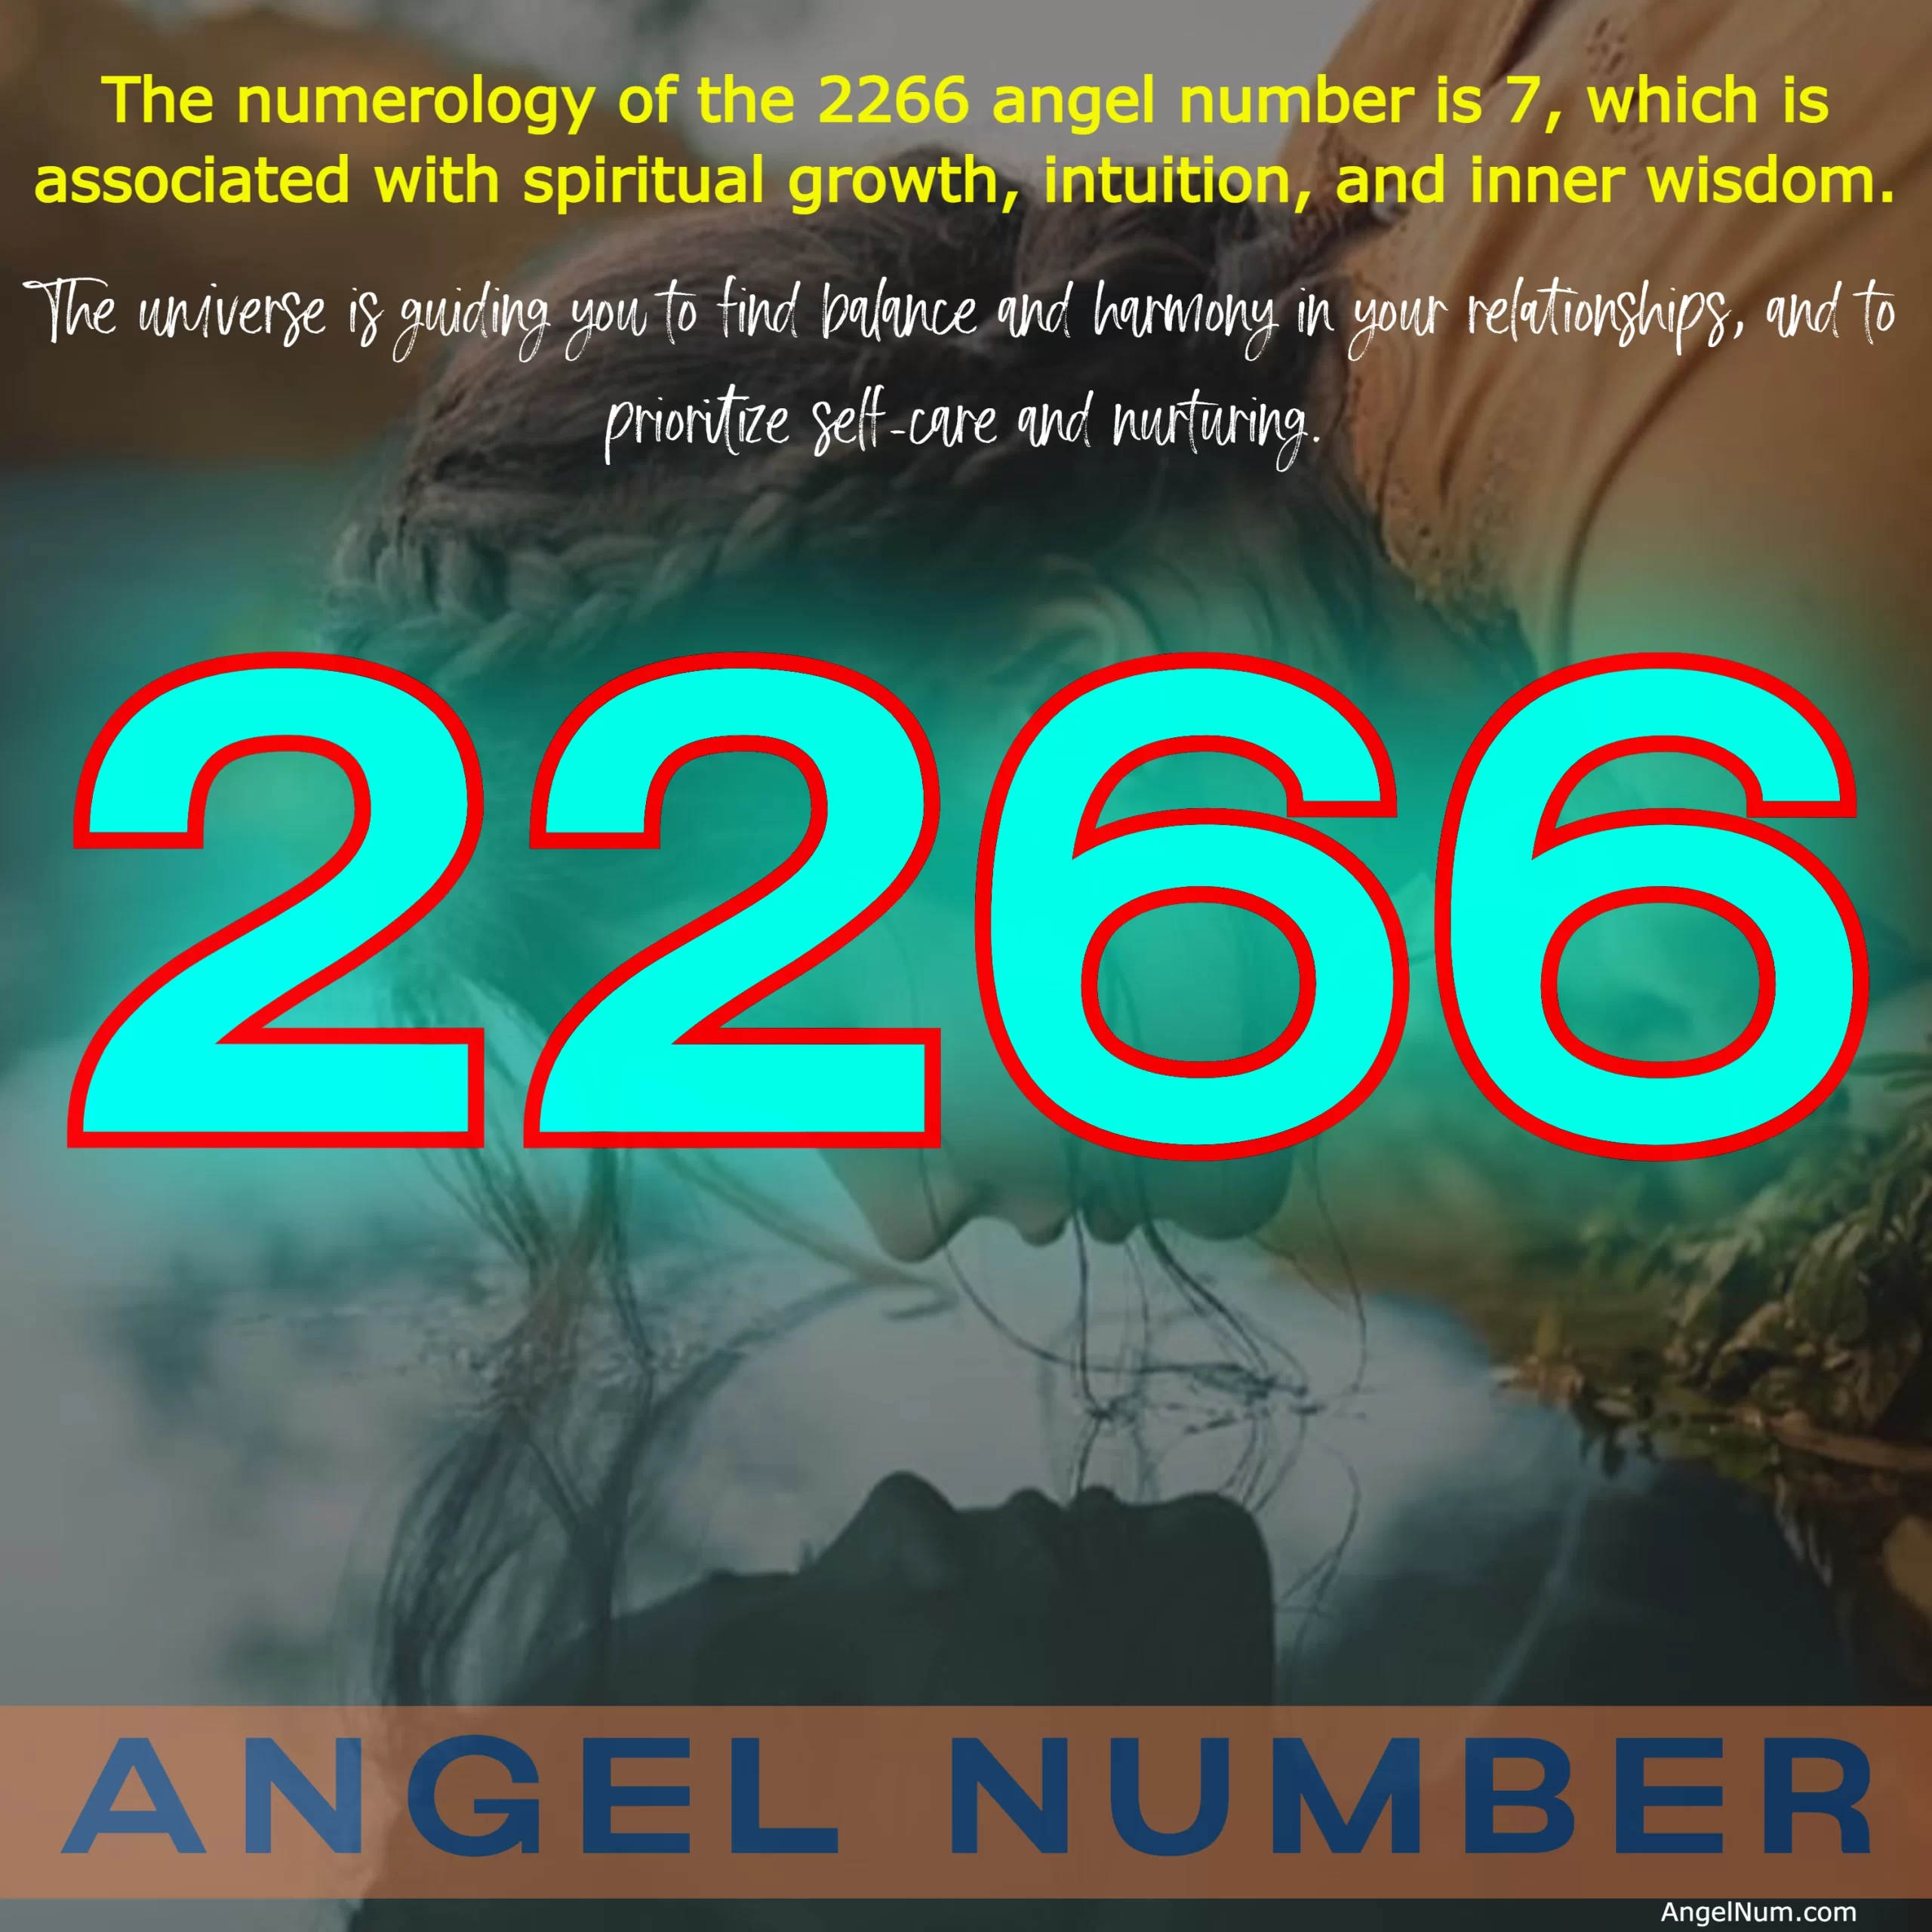 Angel Number 2266: Finding Balance and Harmony in All Areas of Life